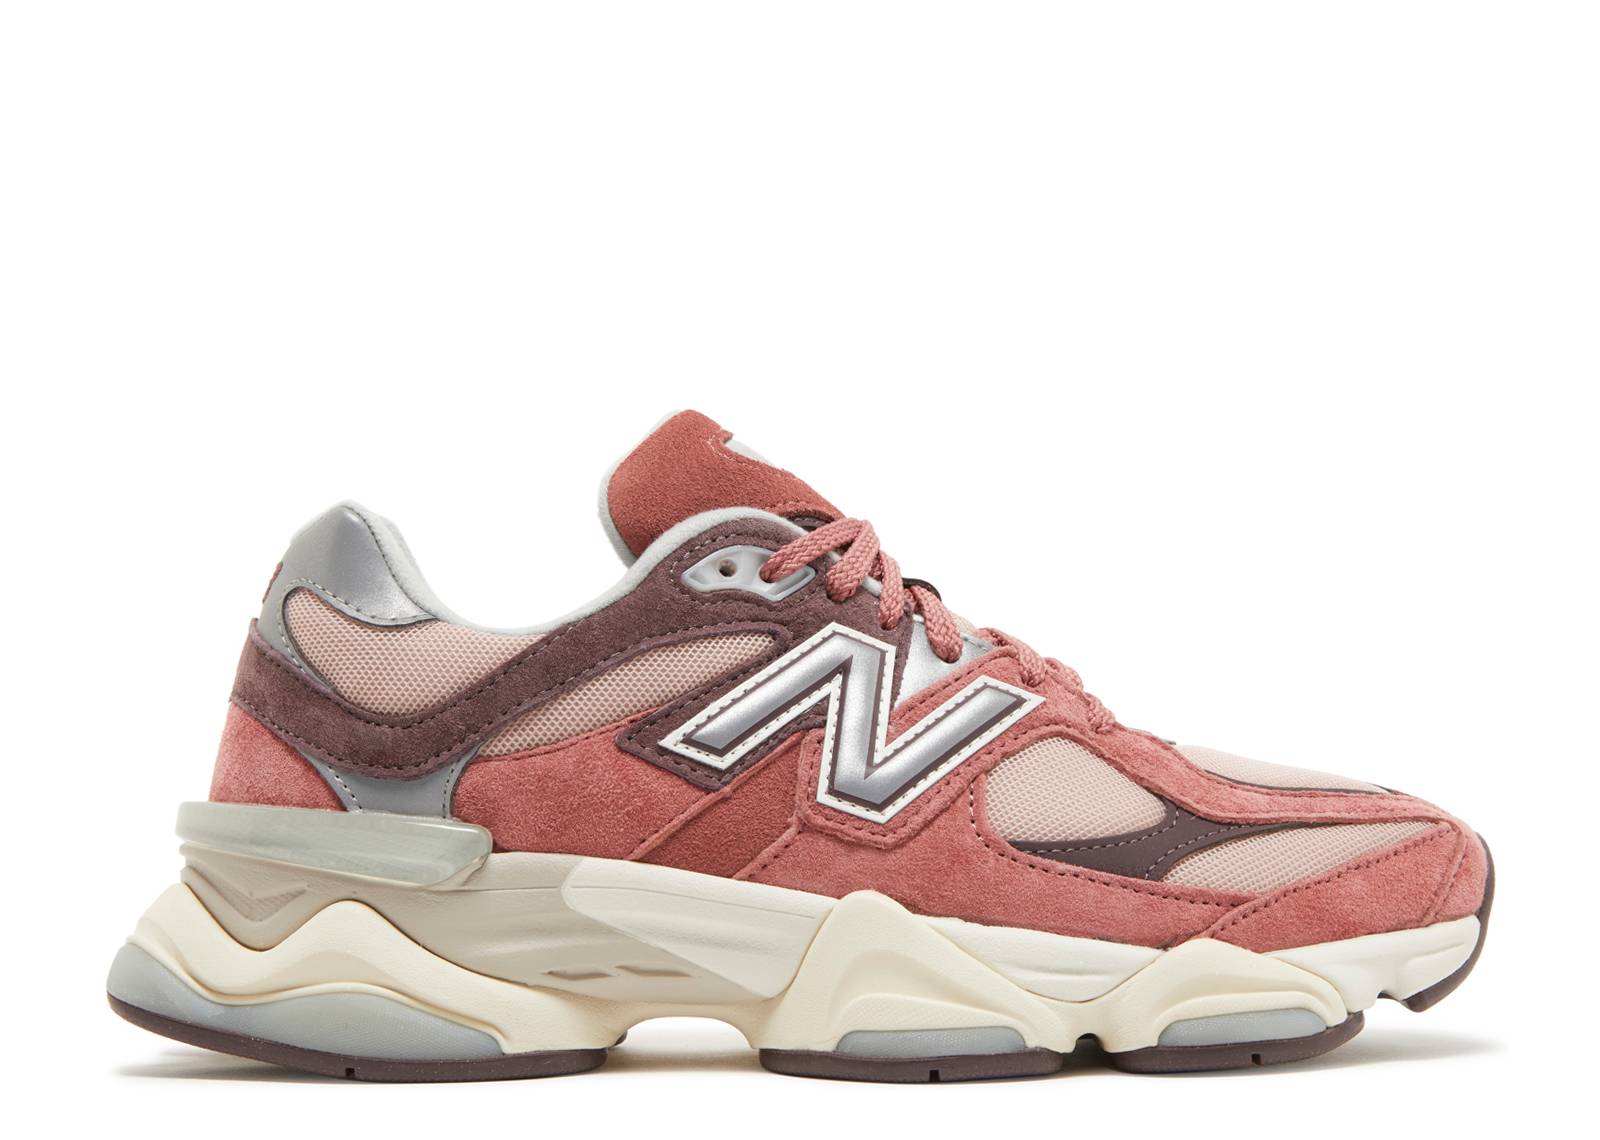 9060 Cherry Blossom Pack - Mineral Red